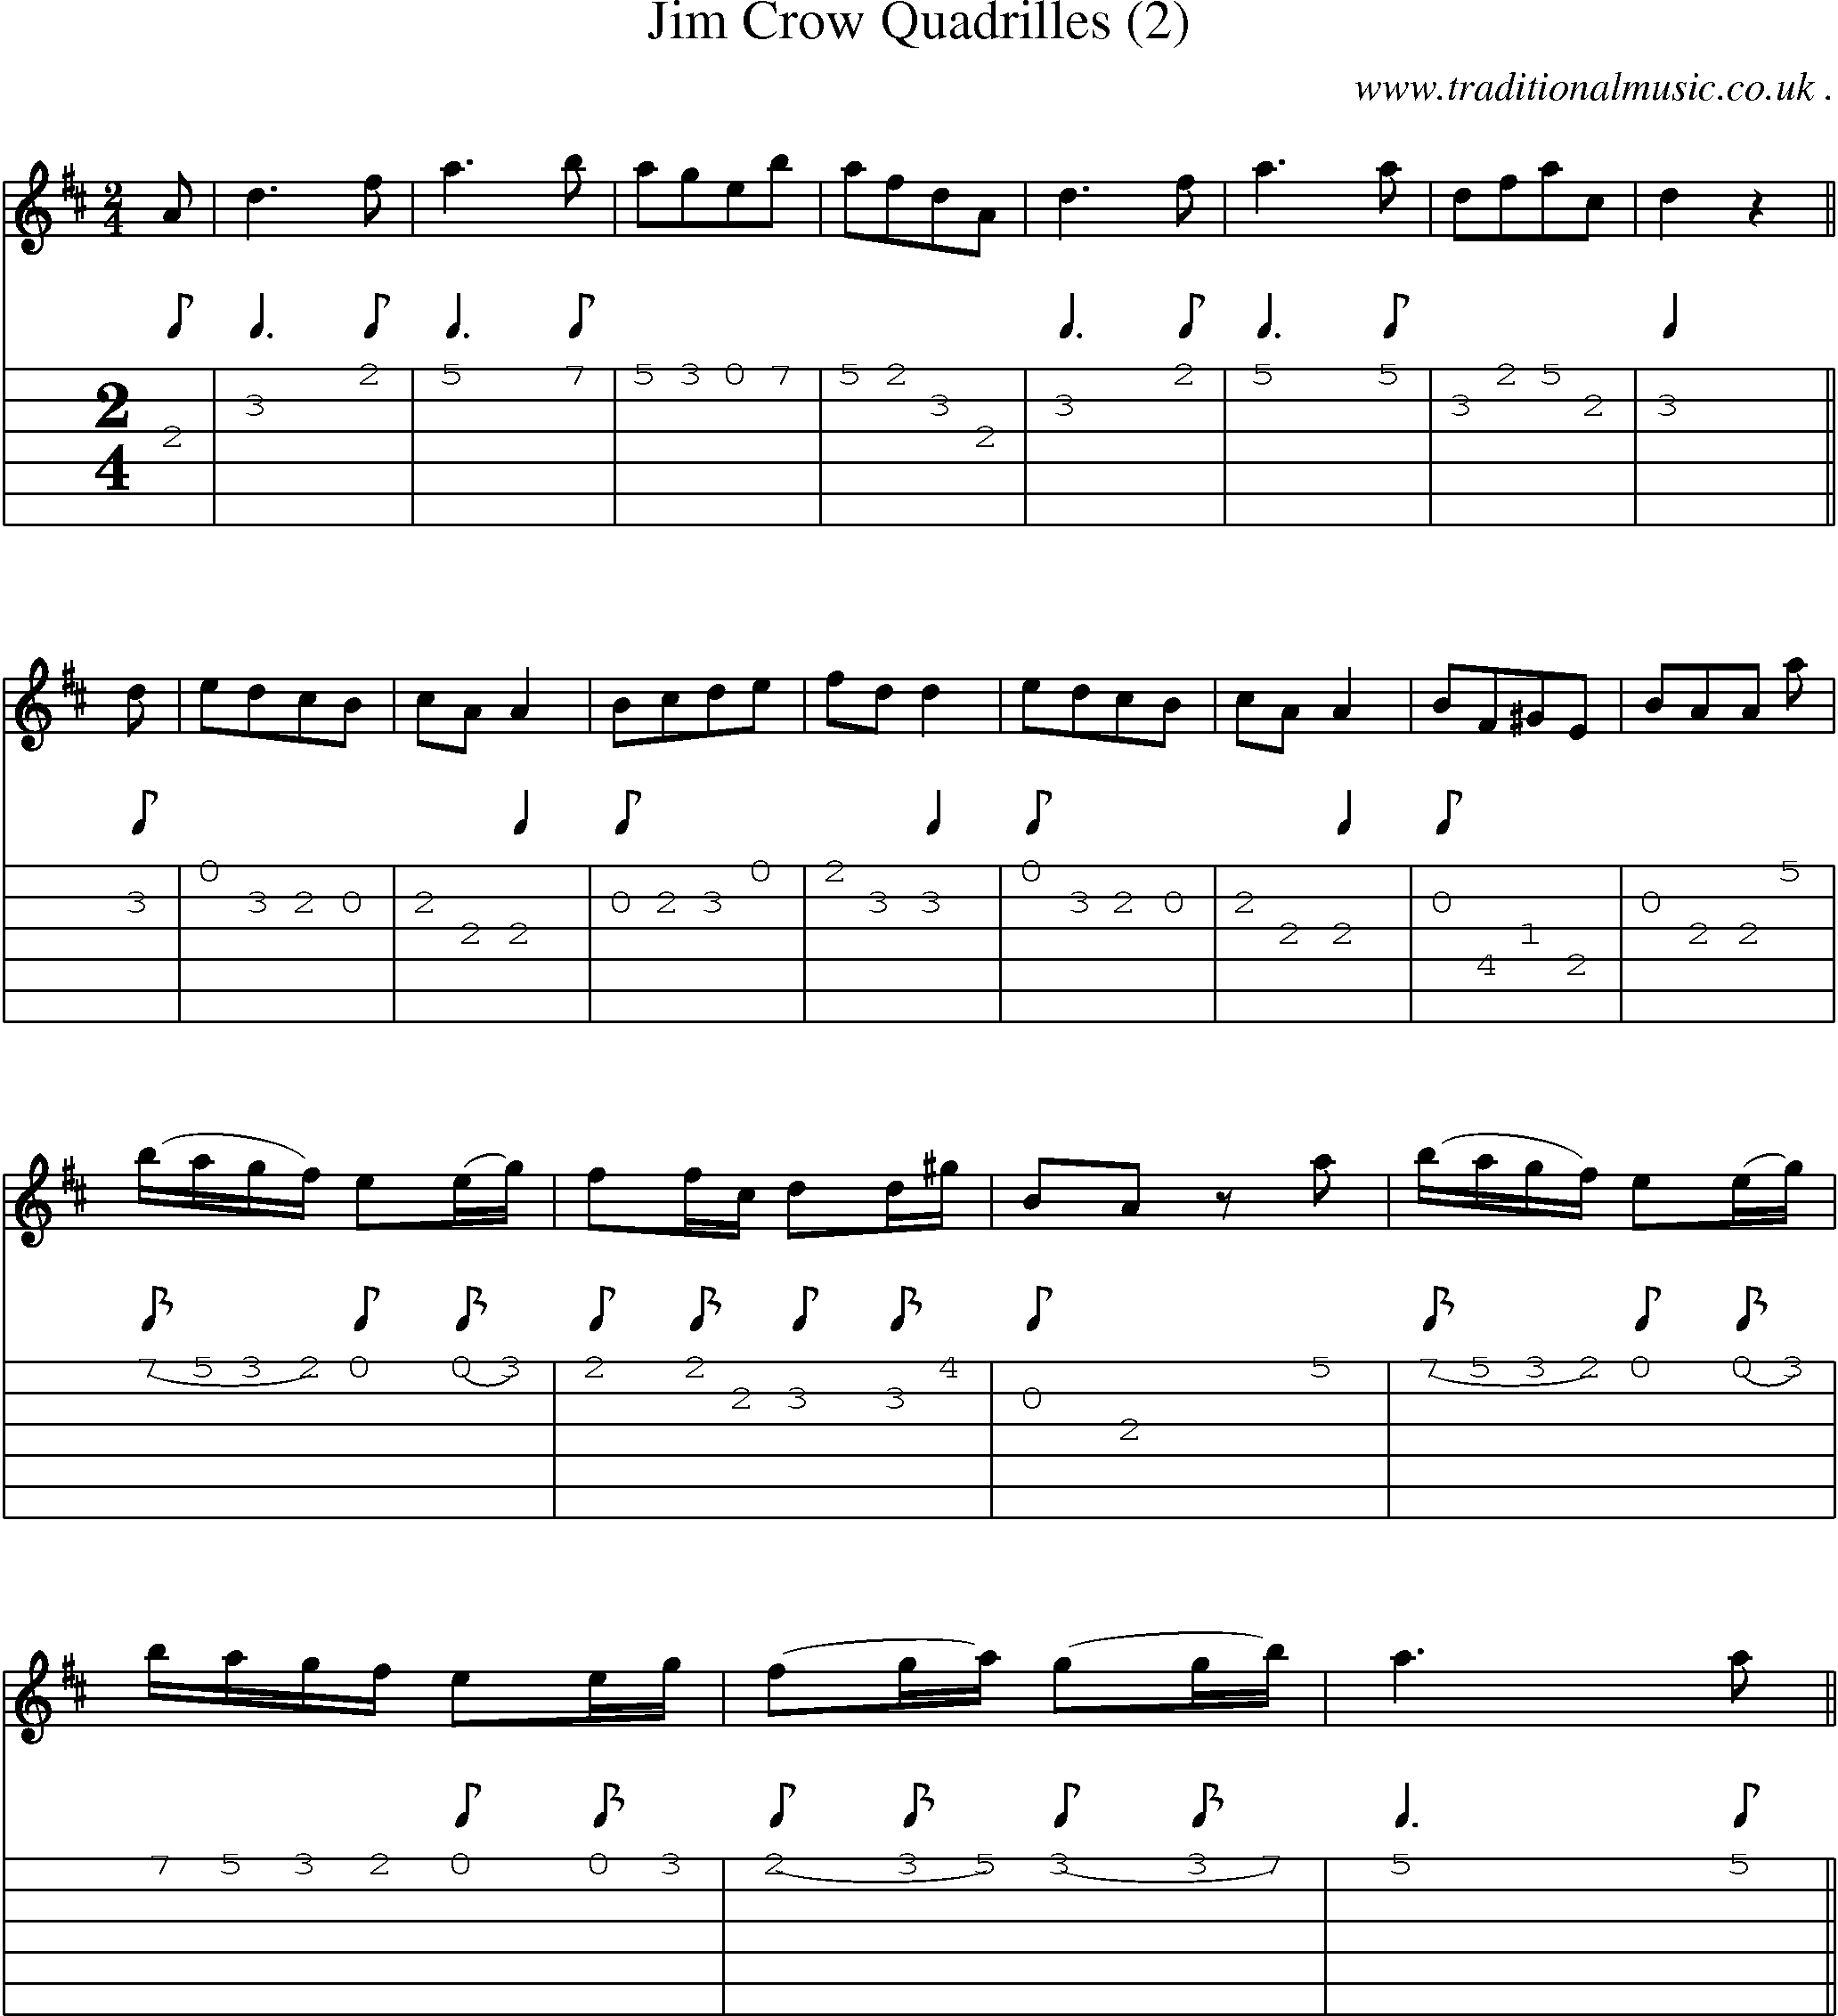 Sheet-Music and Guitar Tabs for Jim Crow Quadrilles (2)